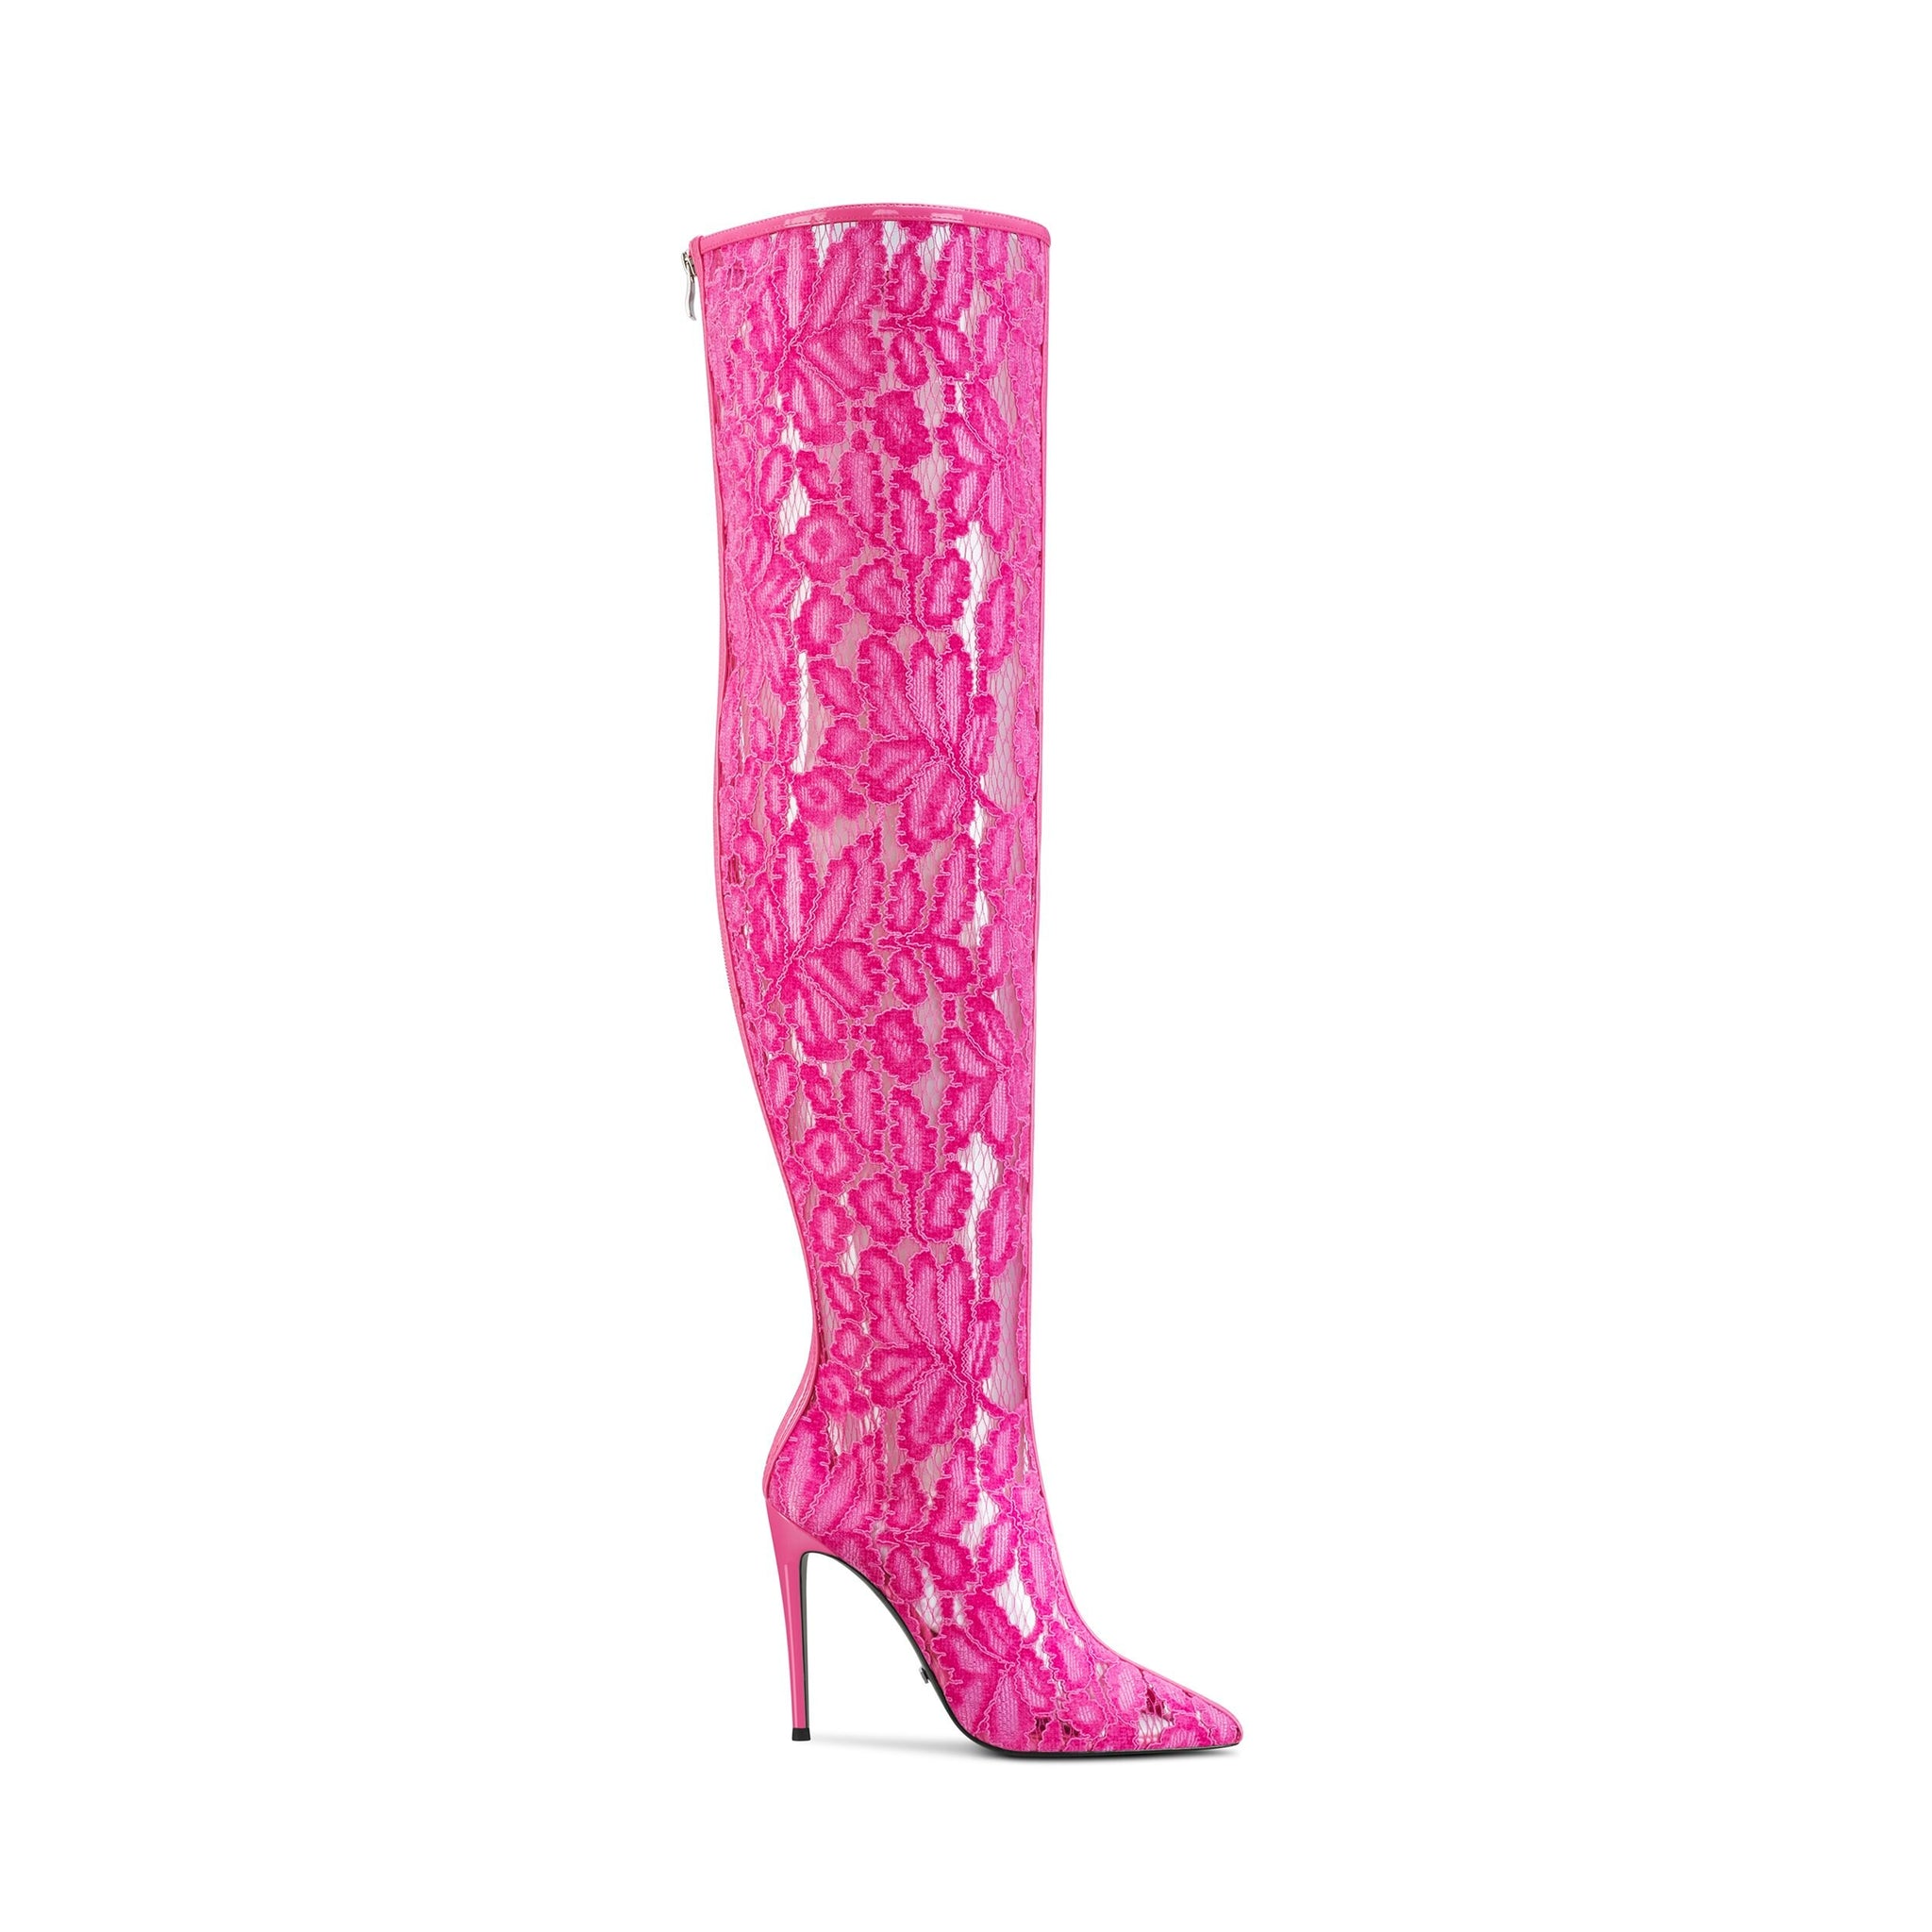 PINKY LACE BOOTS